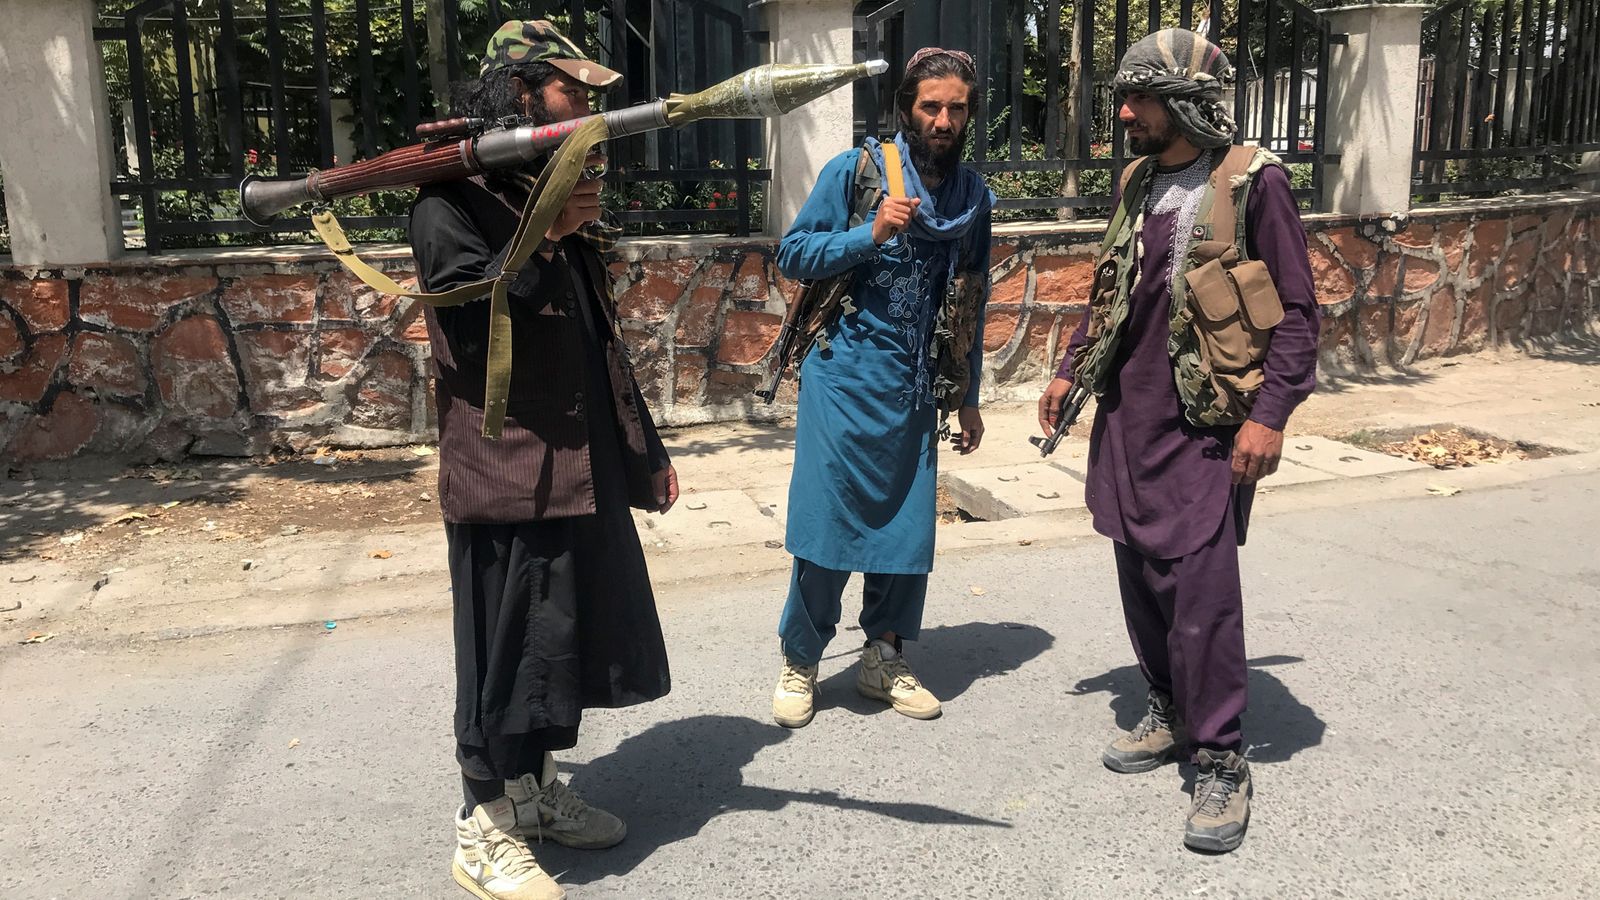 Taliban to remain banned on Facebook, despite taking power in Afghanistan